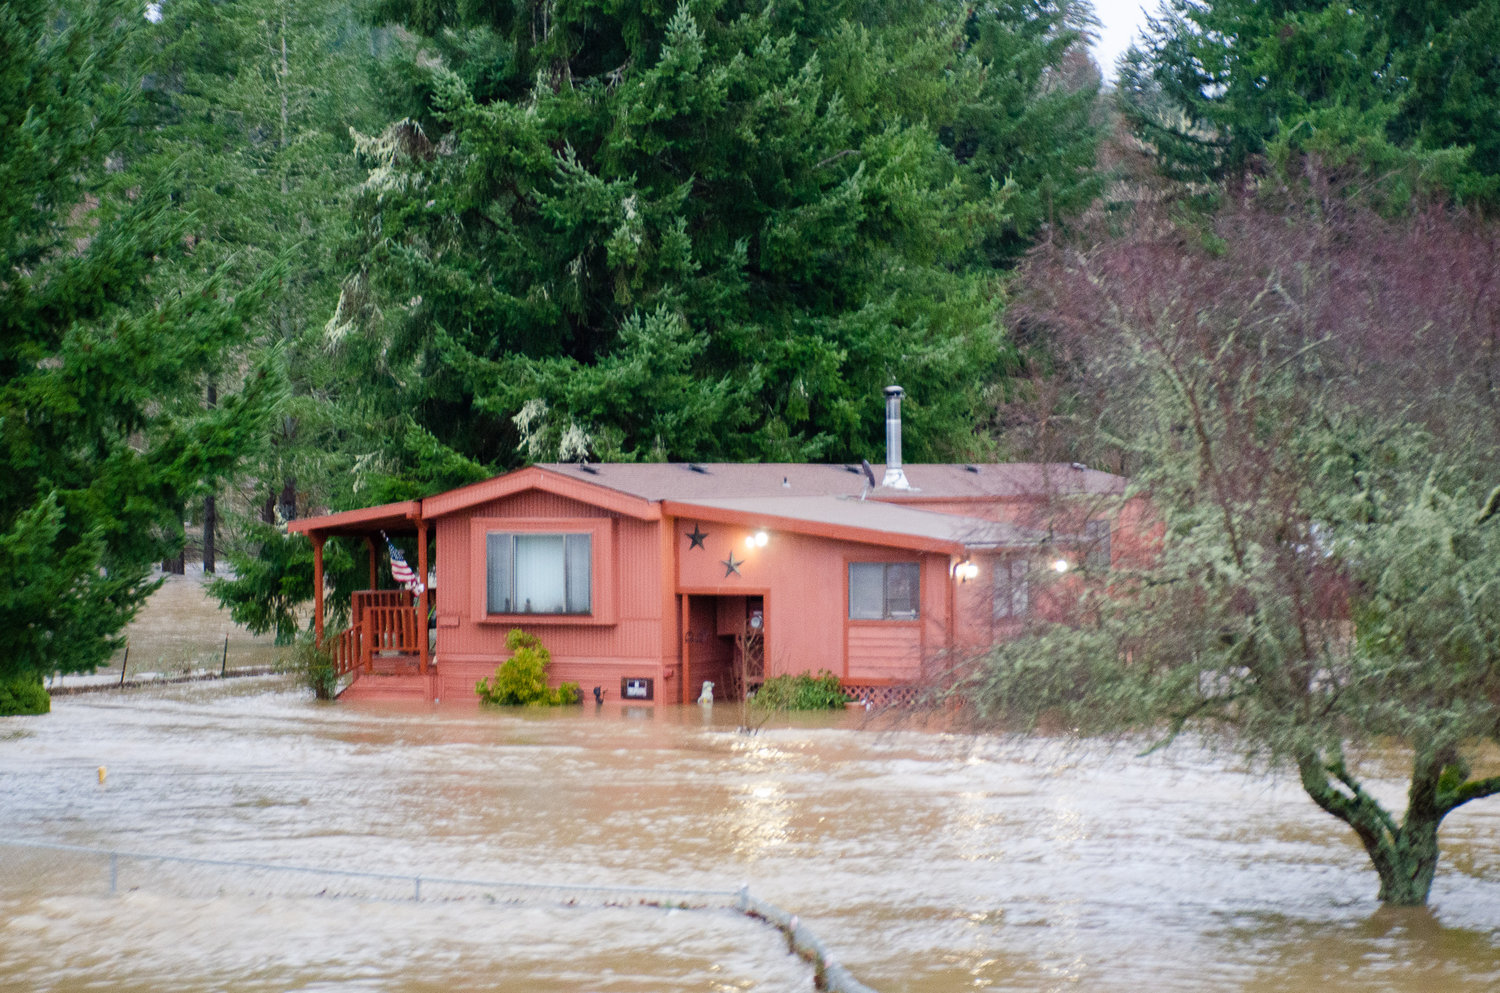 Bucoda residents awoke Friday morning to Skookumchuck River floodwaters inundating their roadways, though emergency operation center operators, fire staff and volunteers were waiting for sunlight to assess the damage.